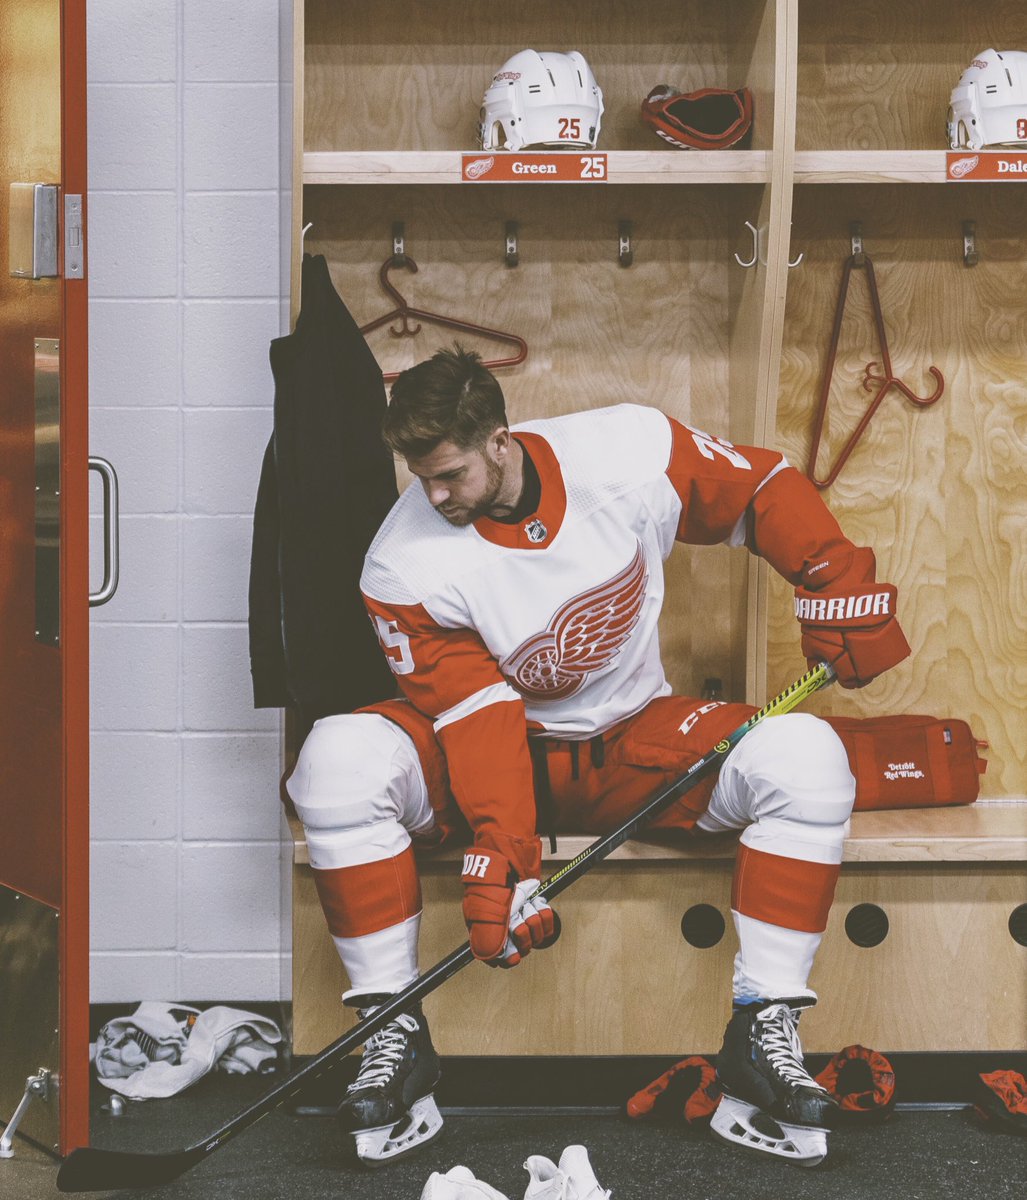 Thank you @DetroitRedWings for the past five years. I’m deeply grateful; it was an honor to play for the winged wheel. To all the fans that make Detroit hockey town - I say thank you, kindly.